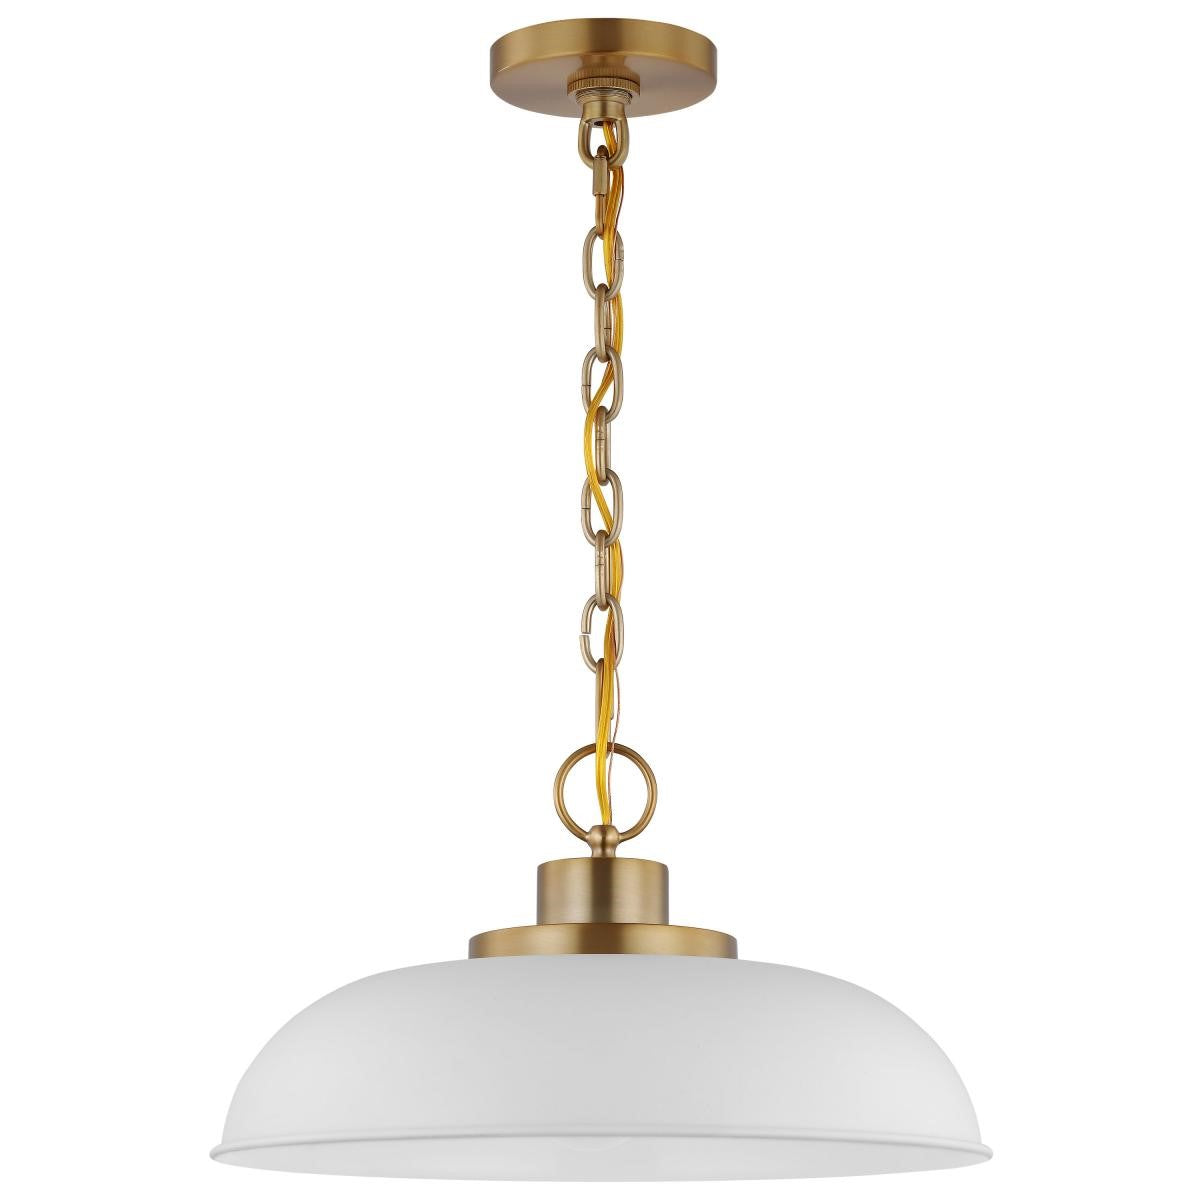 Colony 15 in. Pendant Light Matte White with Vintage Brass